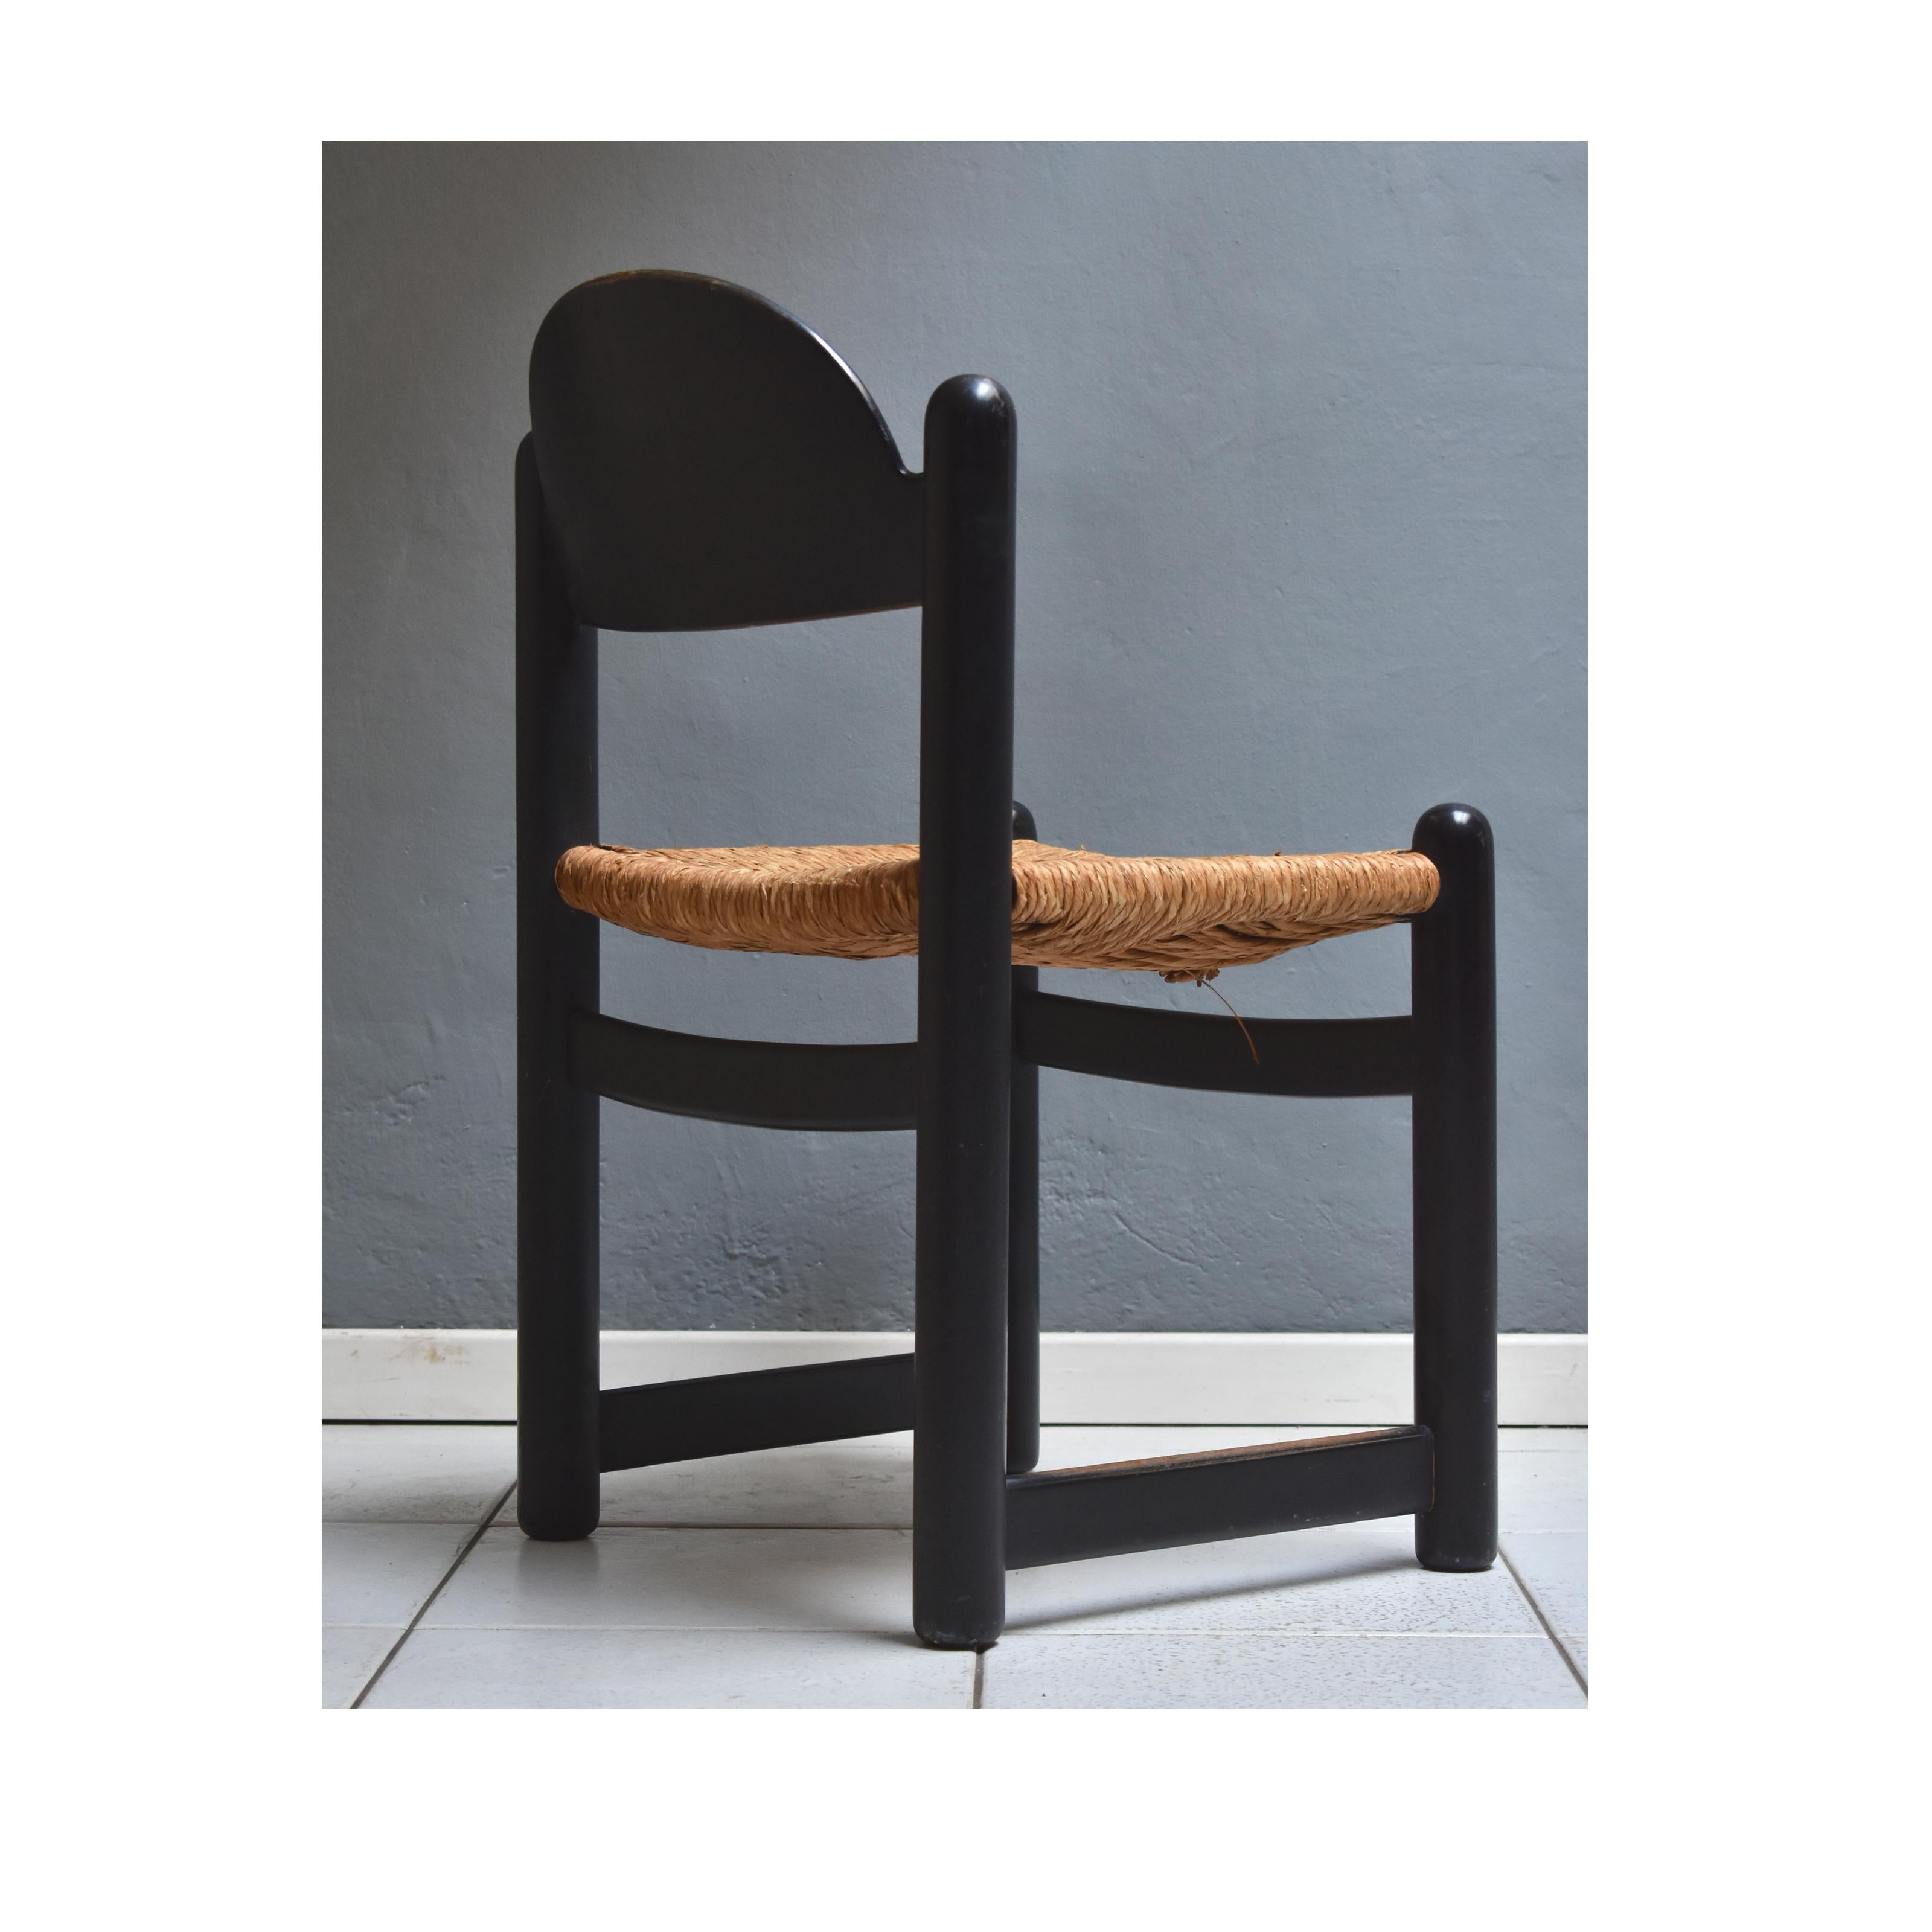 Wicker Mid-Century modern italian 1970set of 4 dining chairs black wood and wicker seat